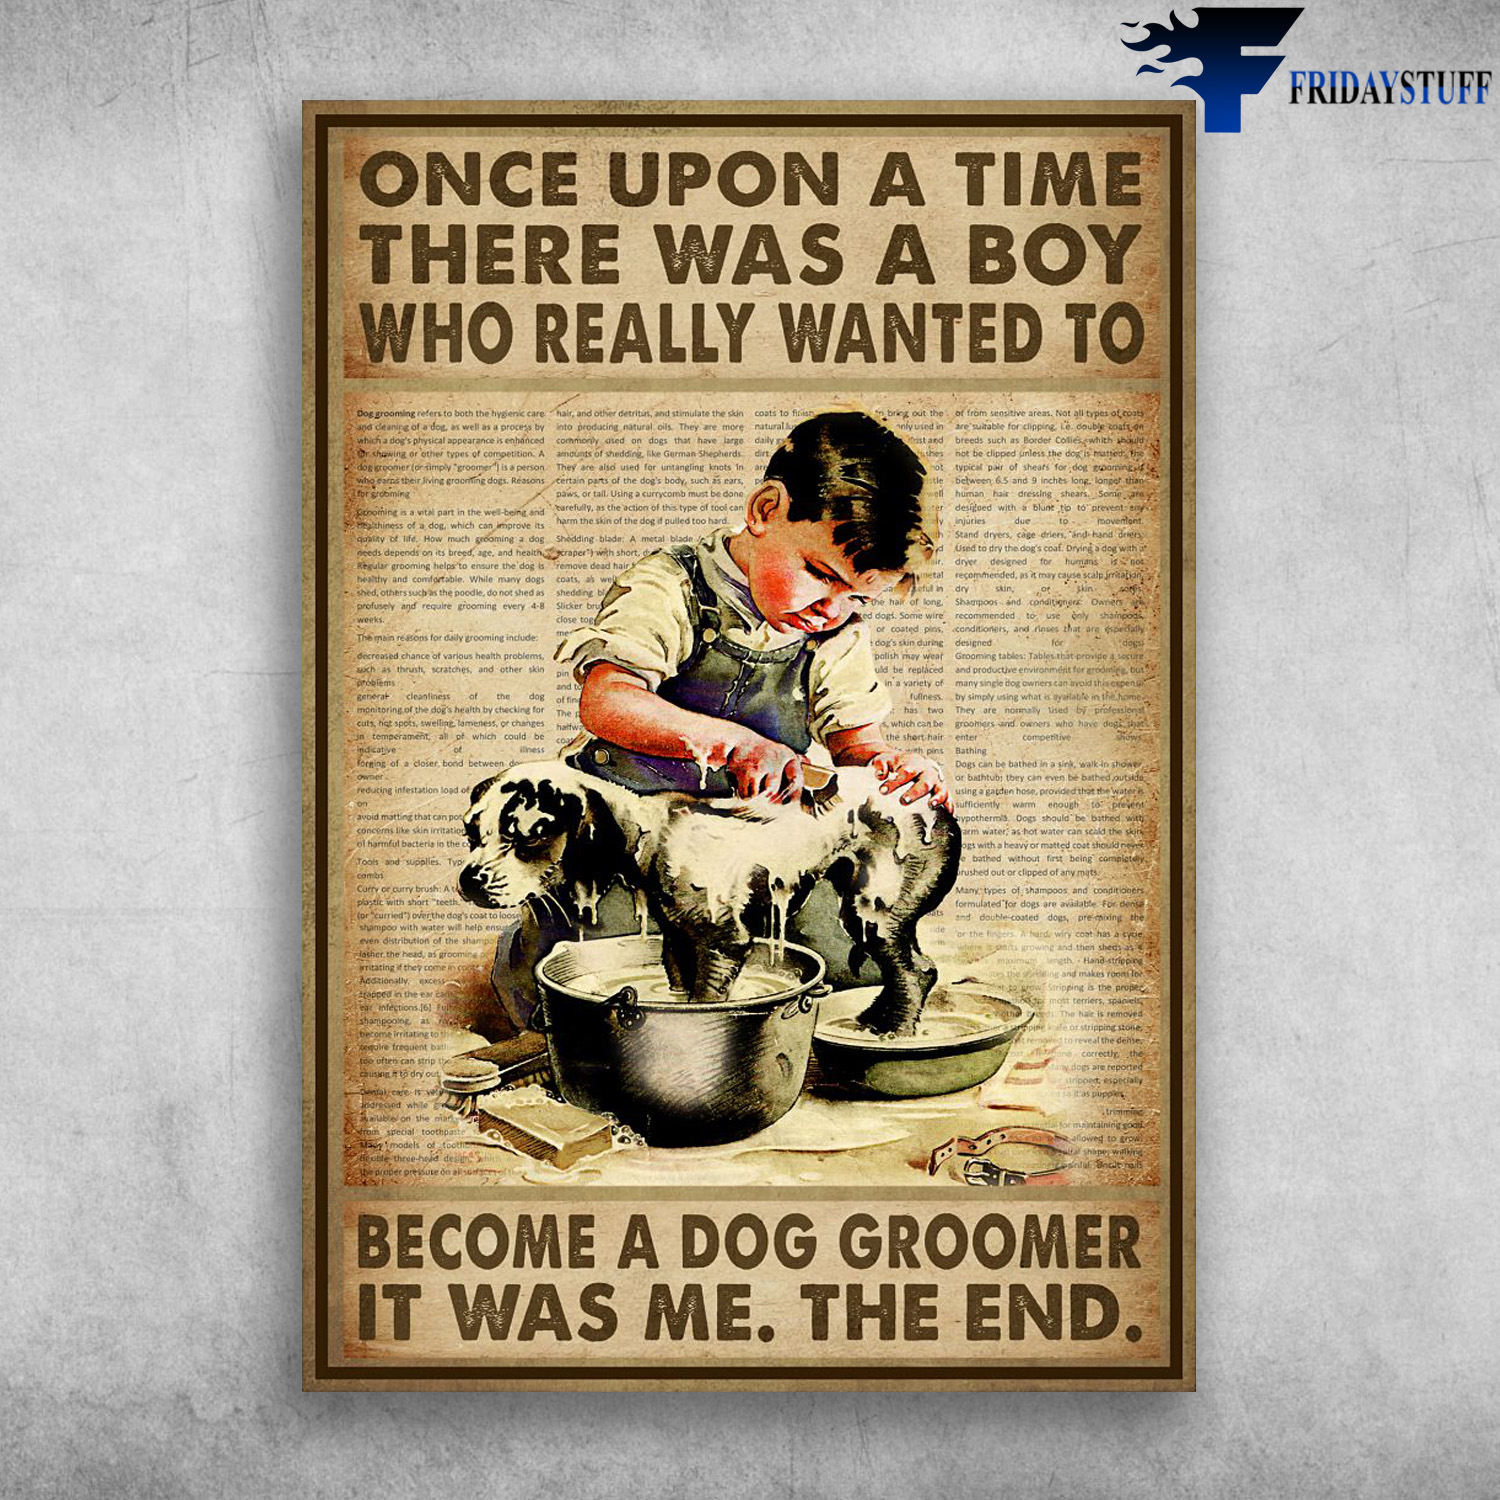 Groomer Boy - Once Upon A Time, There Was A Boy, Who Really Wanted To, Be Come A Dog Grommer, It Was Me, The End